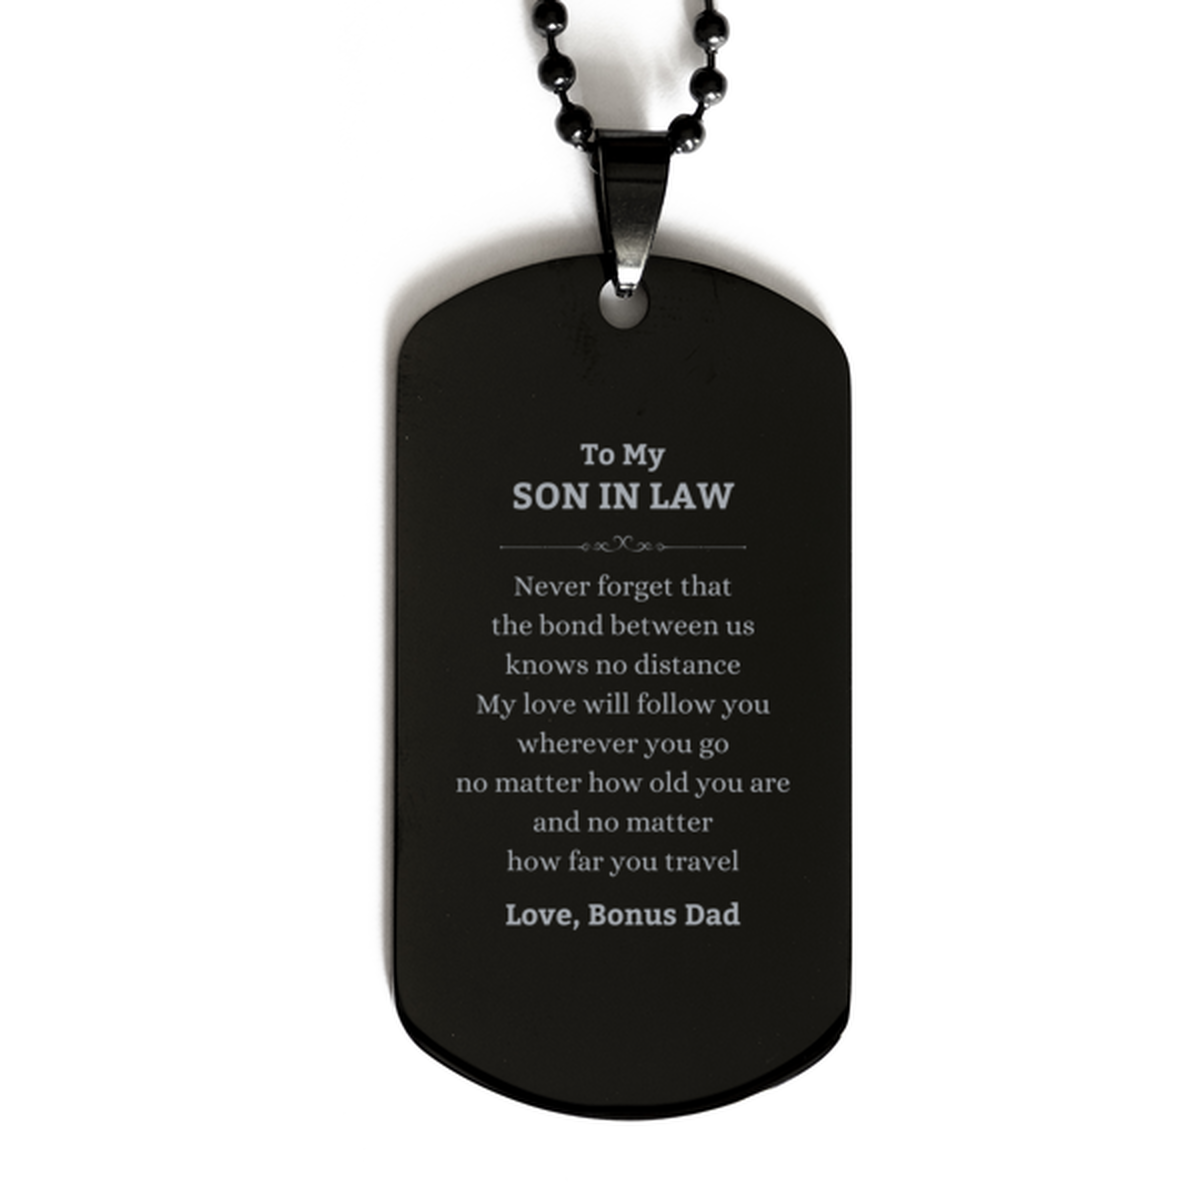 Son In Law Birthday Gifts from Bonus Dad, Adjustable Black Dog Tag for Son In Law Christmas Graduation Unique Gifts Son In Law Never forget that the bond between us knows no distance. Love, Bonus Dad